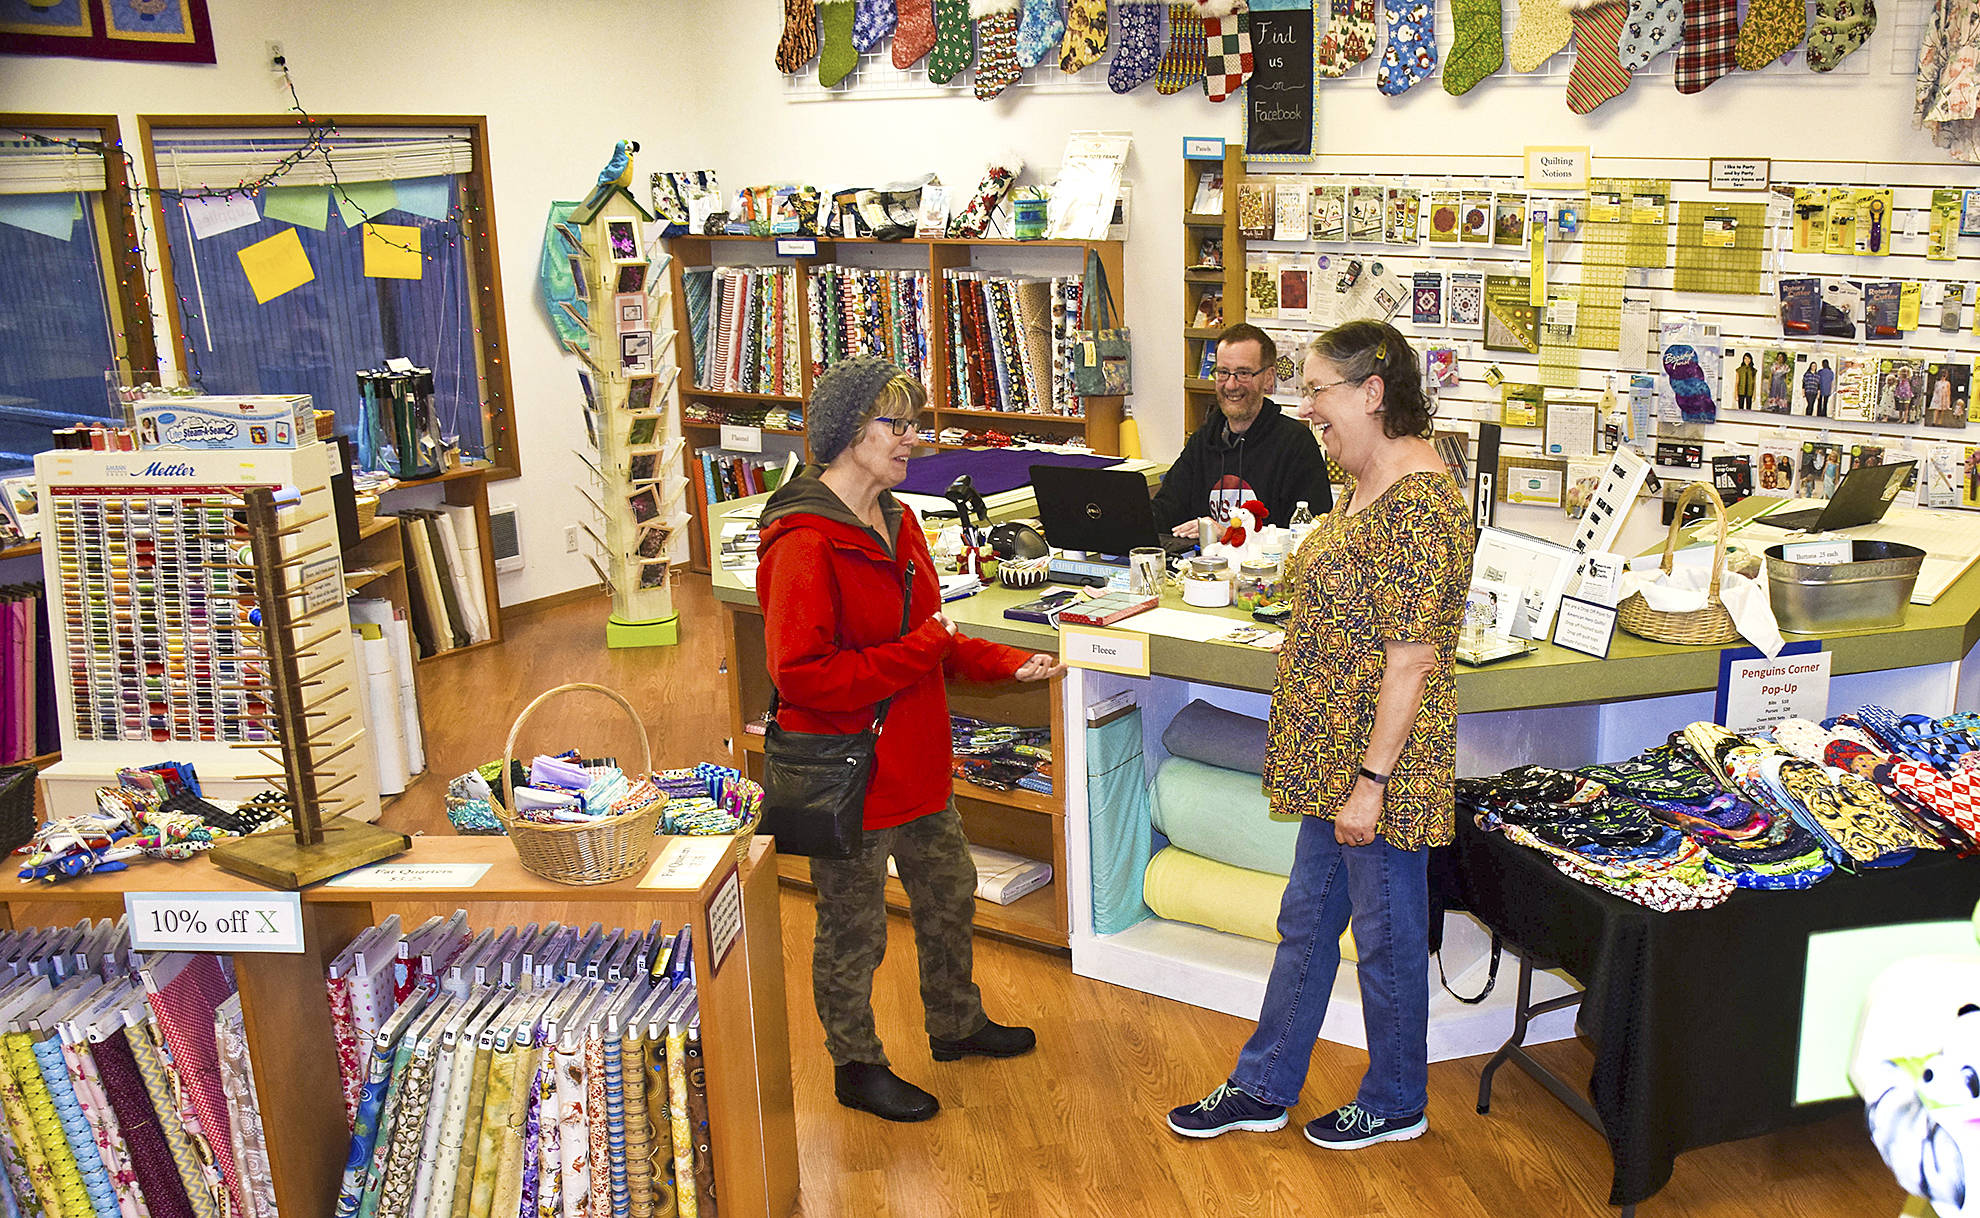 Photo by Scott D. Johnston                                The new owners of Beach Tyme Fabric & Craft Supply in Ocean Shores, Chuck and Gail Anderson (center and right) chat with a new customer, Kelly Osness of Ocean Shores, at the store located at 873 Pt. Brown Ave. NW.